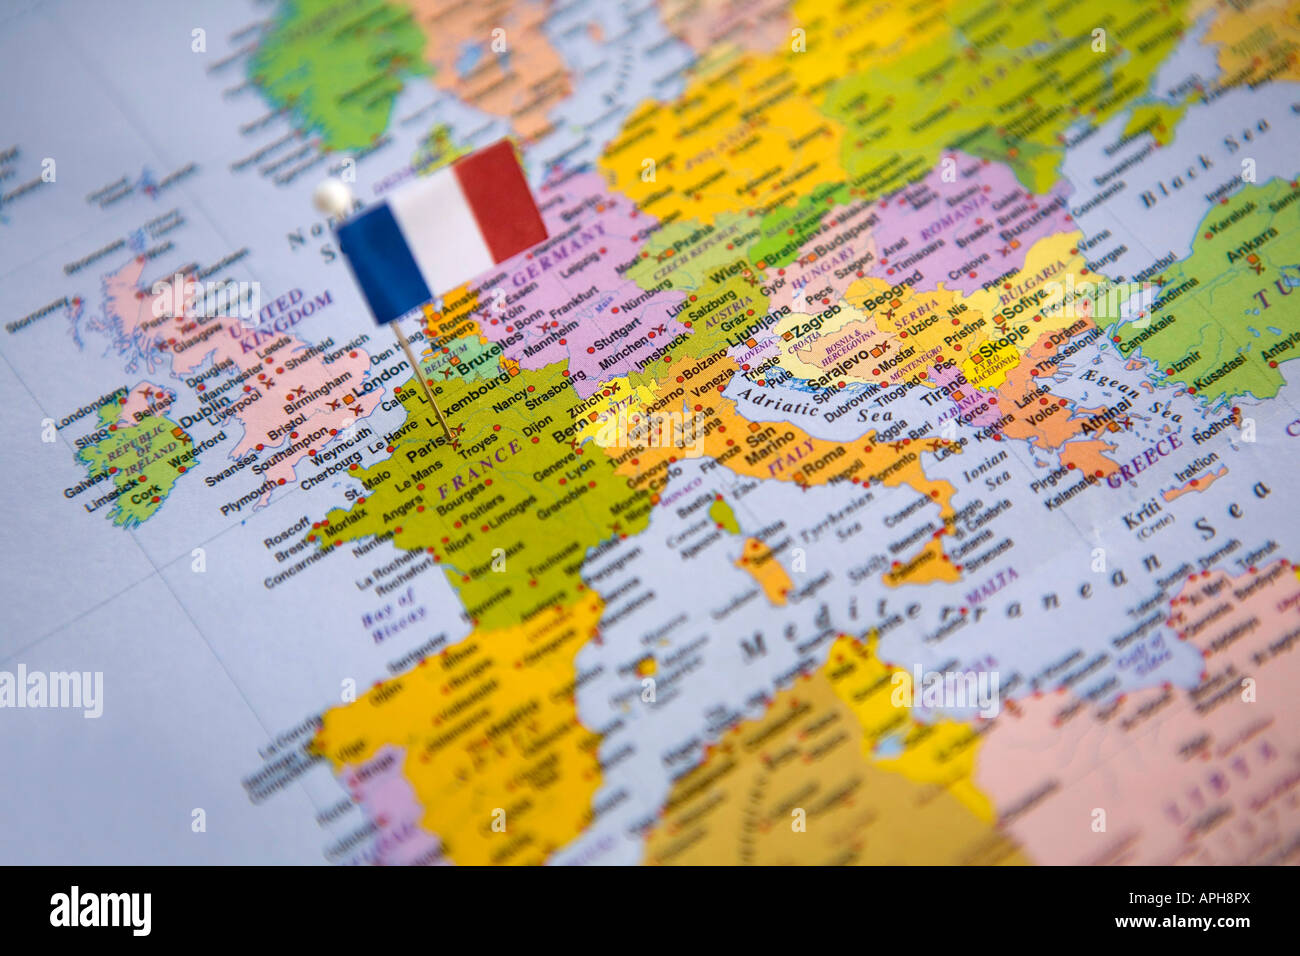 Flag Pin Placed on World Map in the Capital of France Paris Stock ...